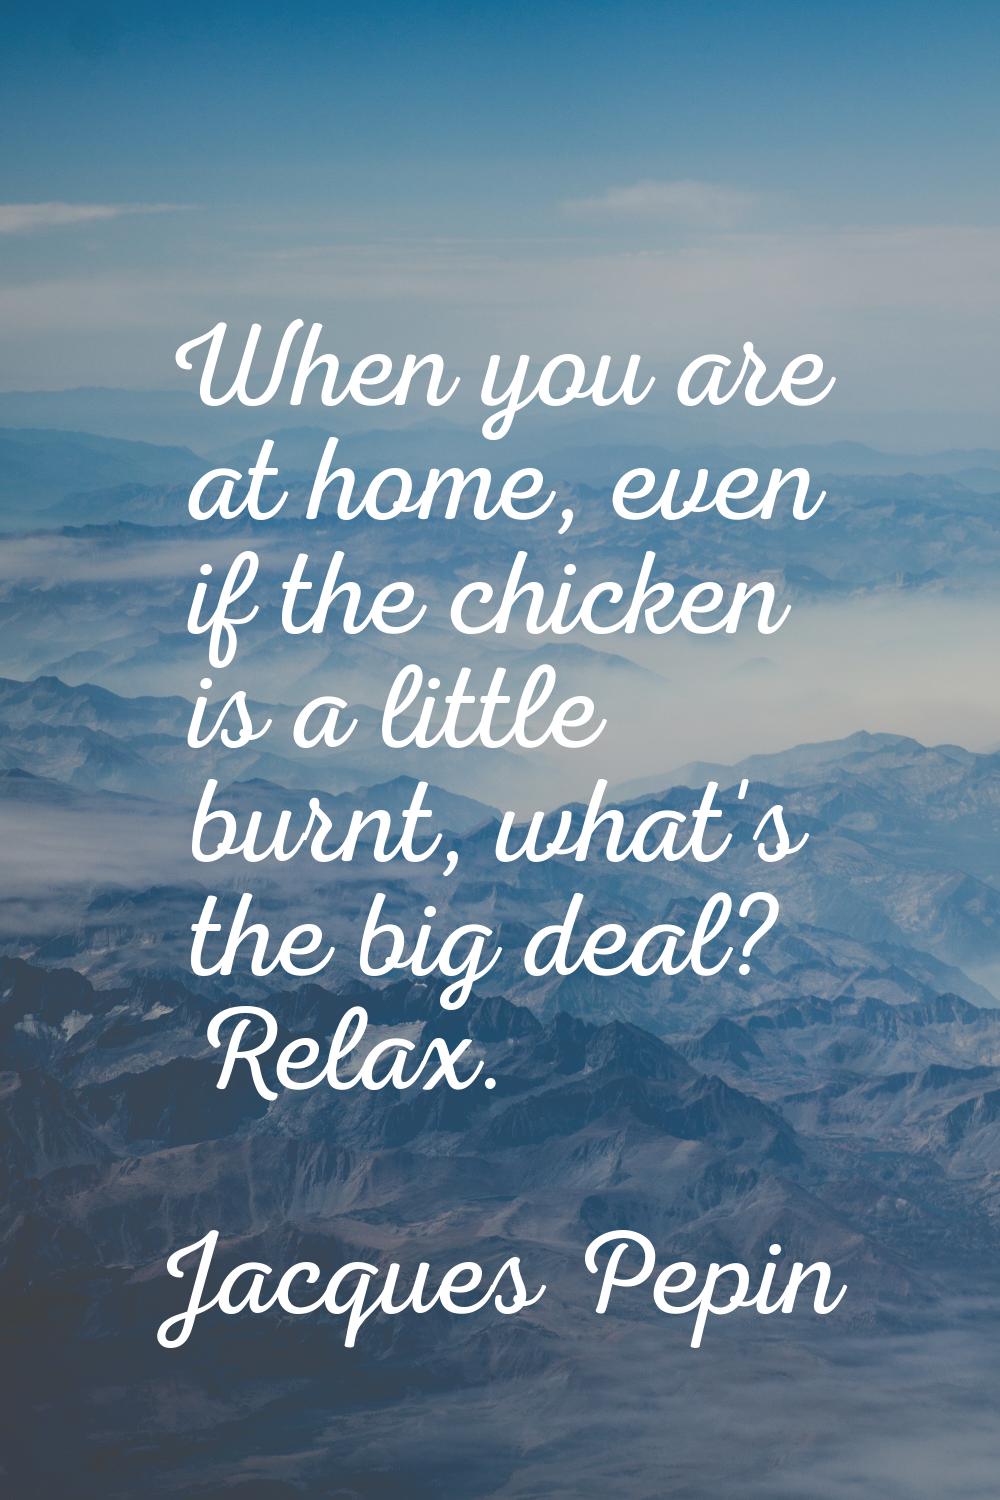 When you are at home, even if the chicken is a little burnt, what's the big deal? Relax.